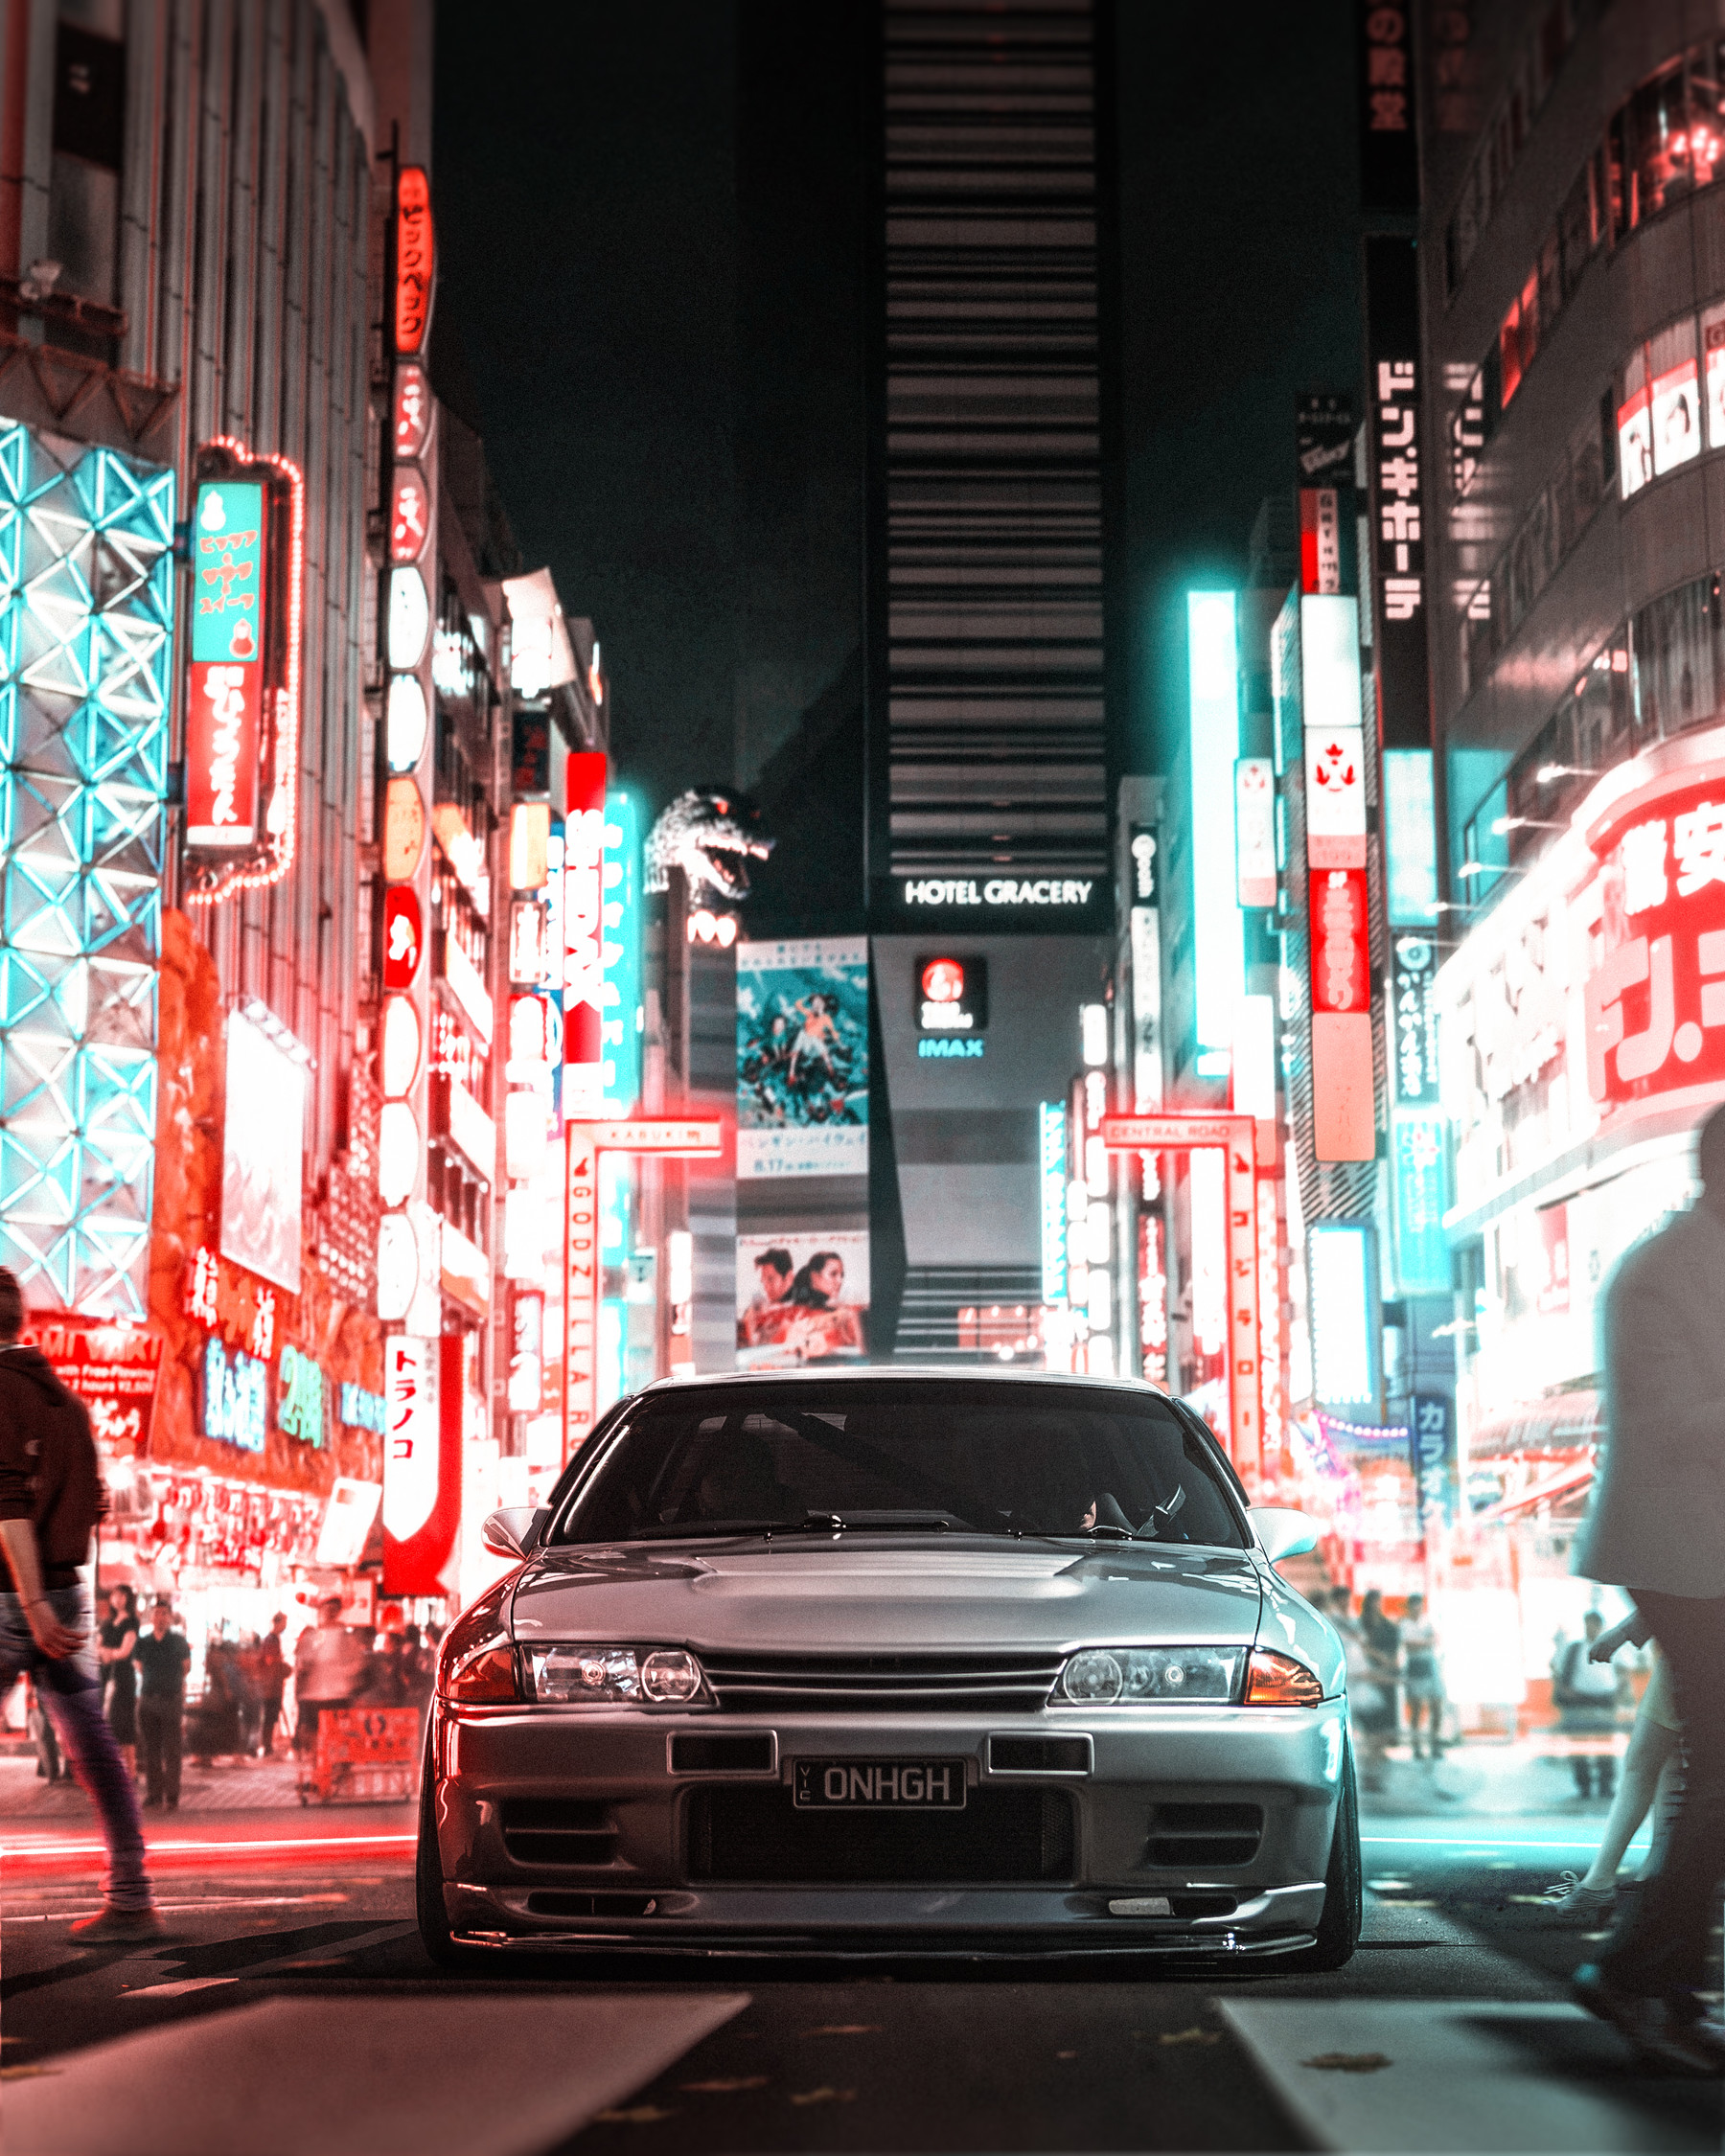 Download Majestic Skyline R32 Roaring On The Streets Wallpaper | Wallpapers .com